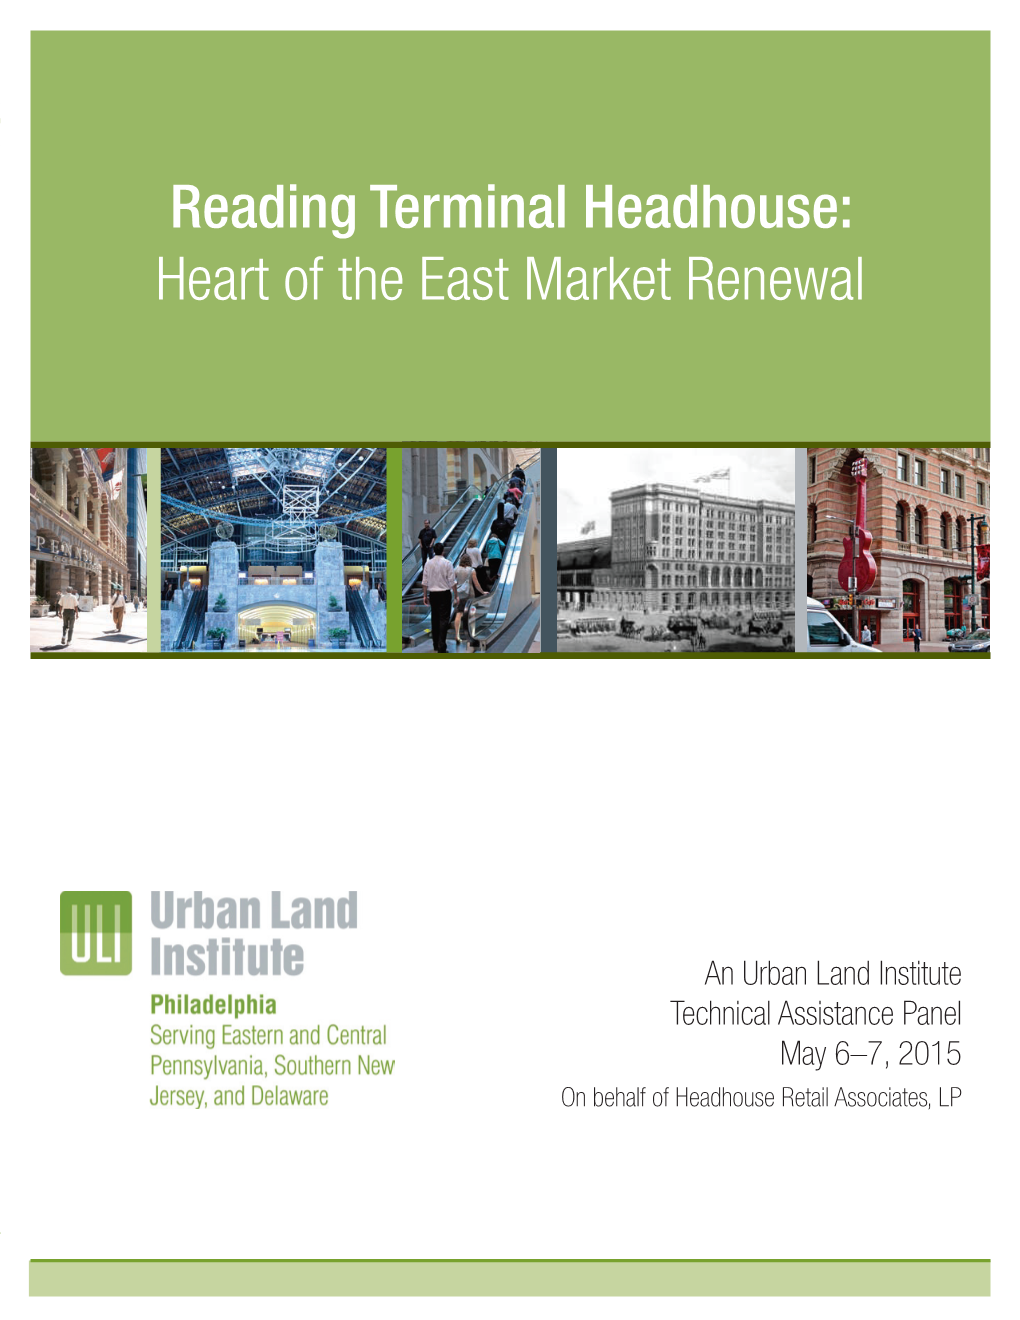 Reading Terminal Headhouse: Heart of the East Market Renewal